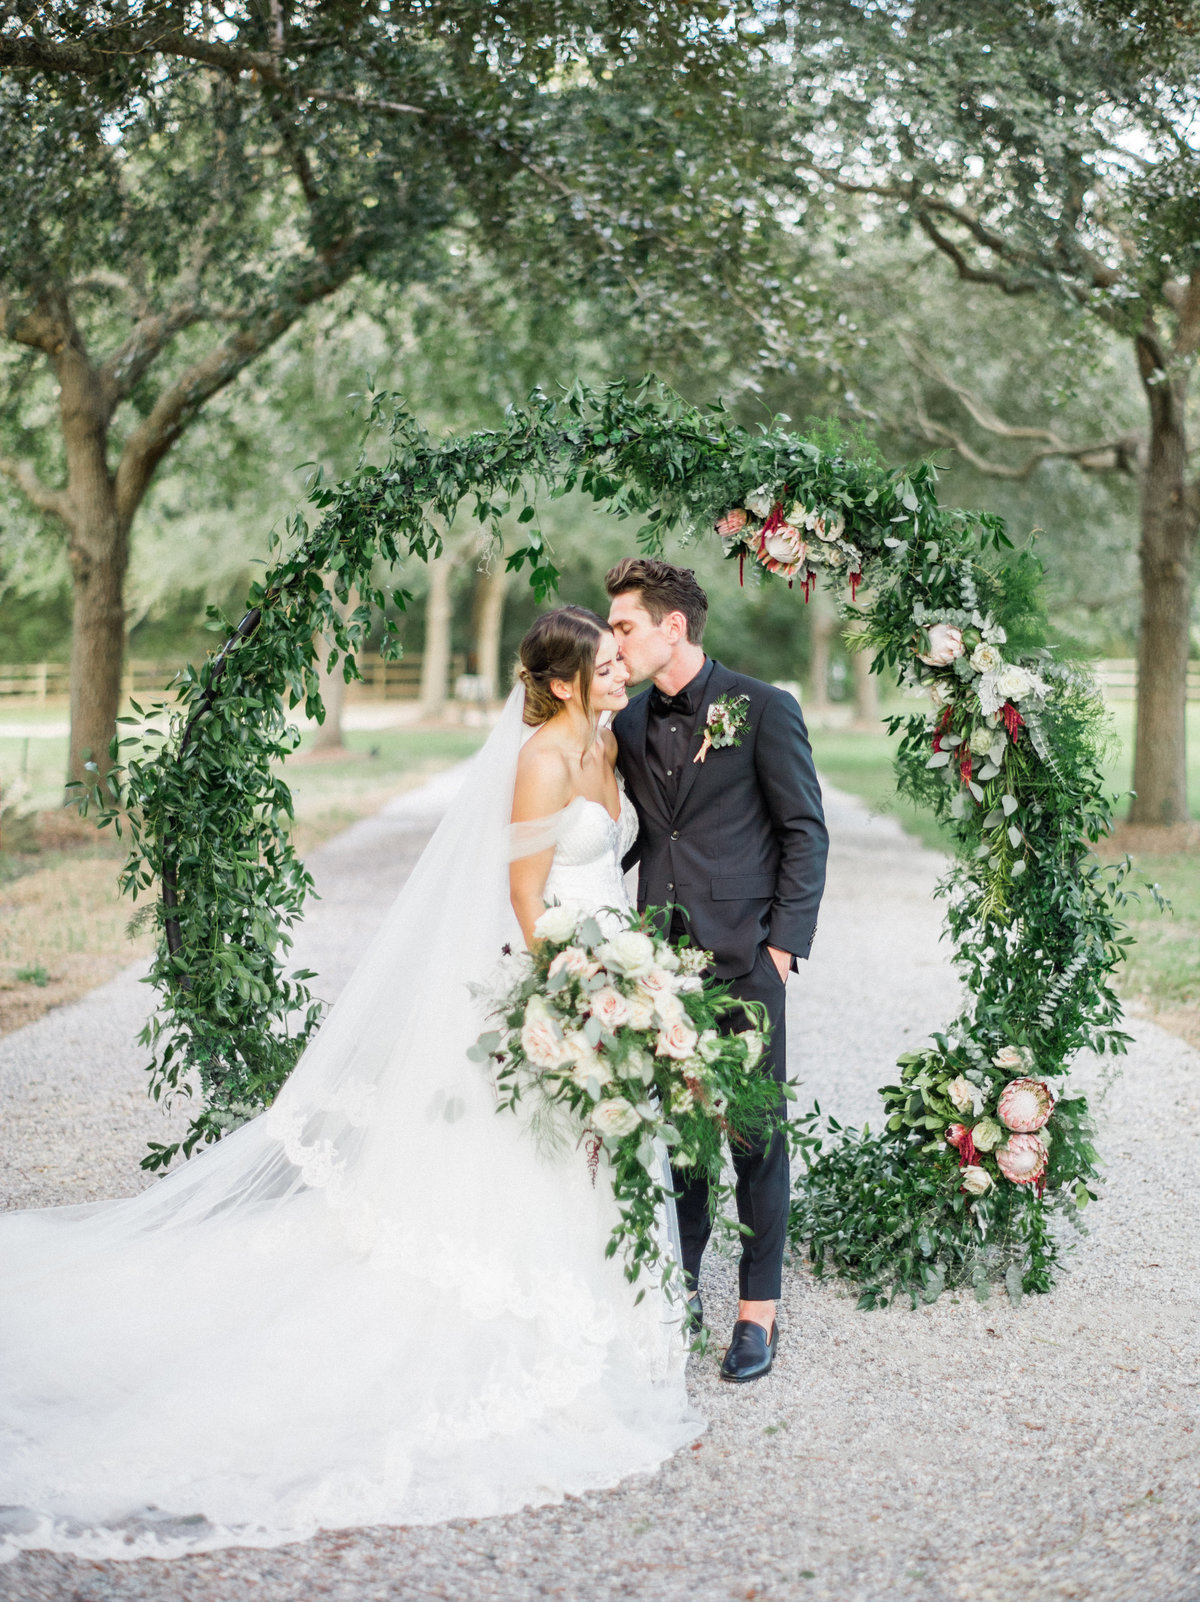 Wedding with lots of greenery at Old Wide Awake Plantation in Charleston